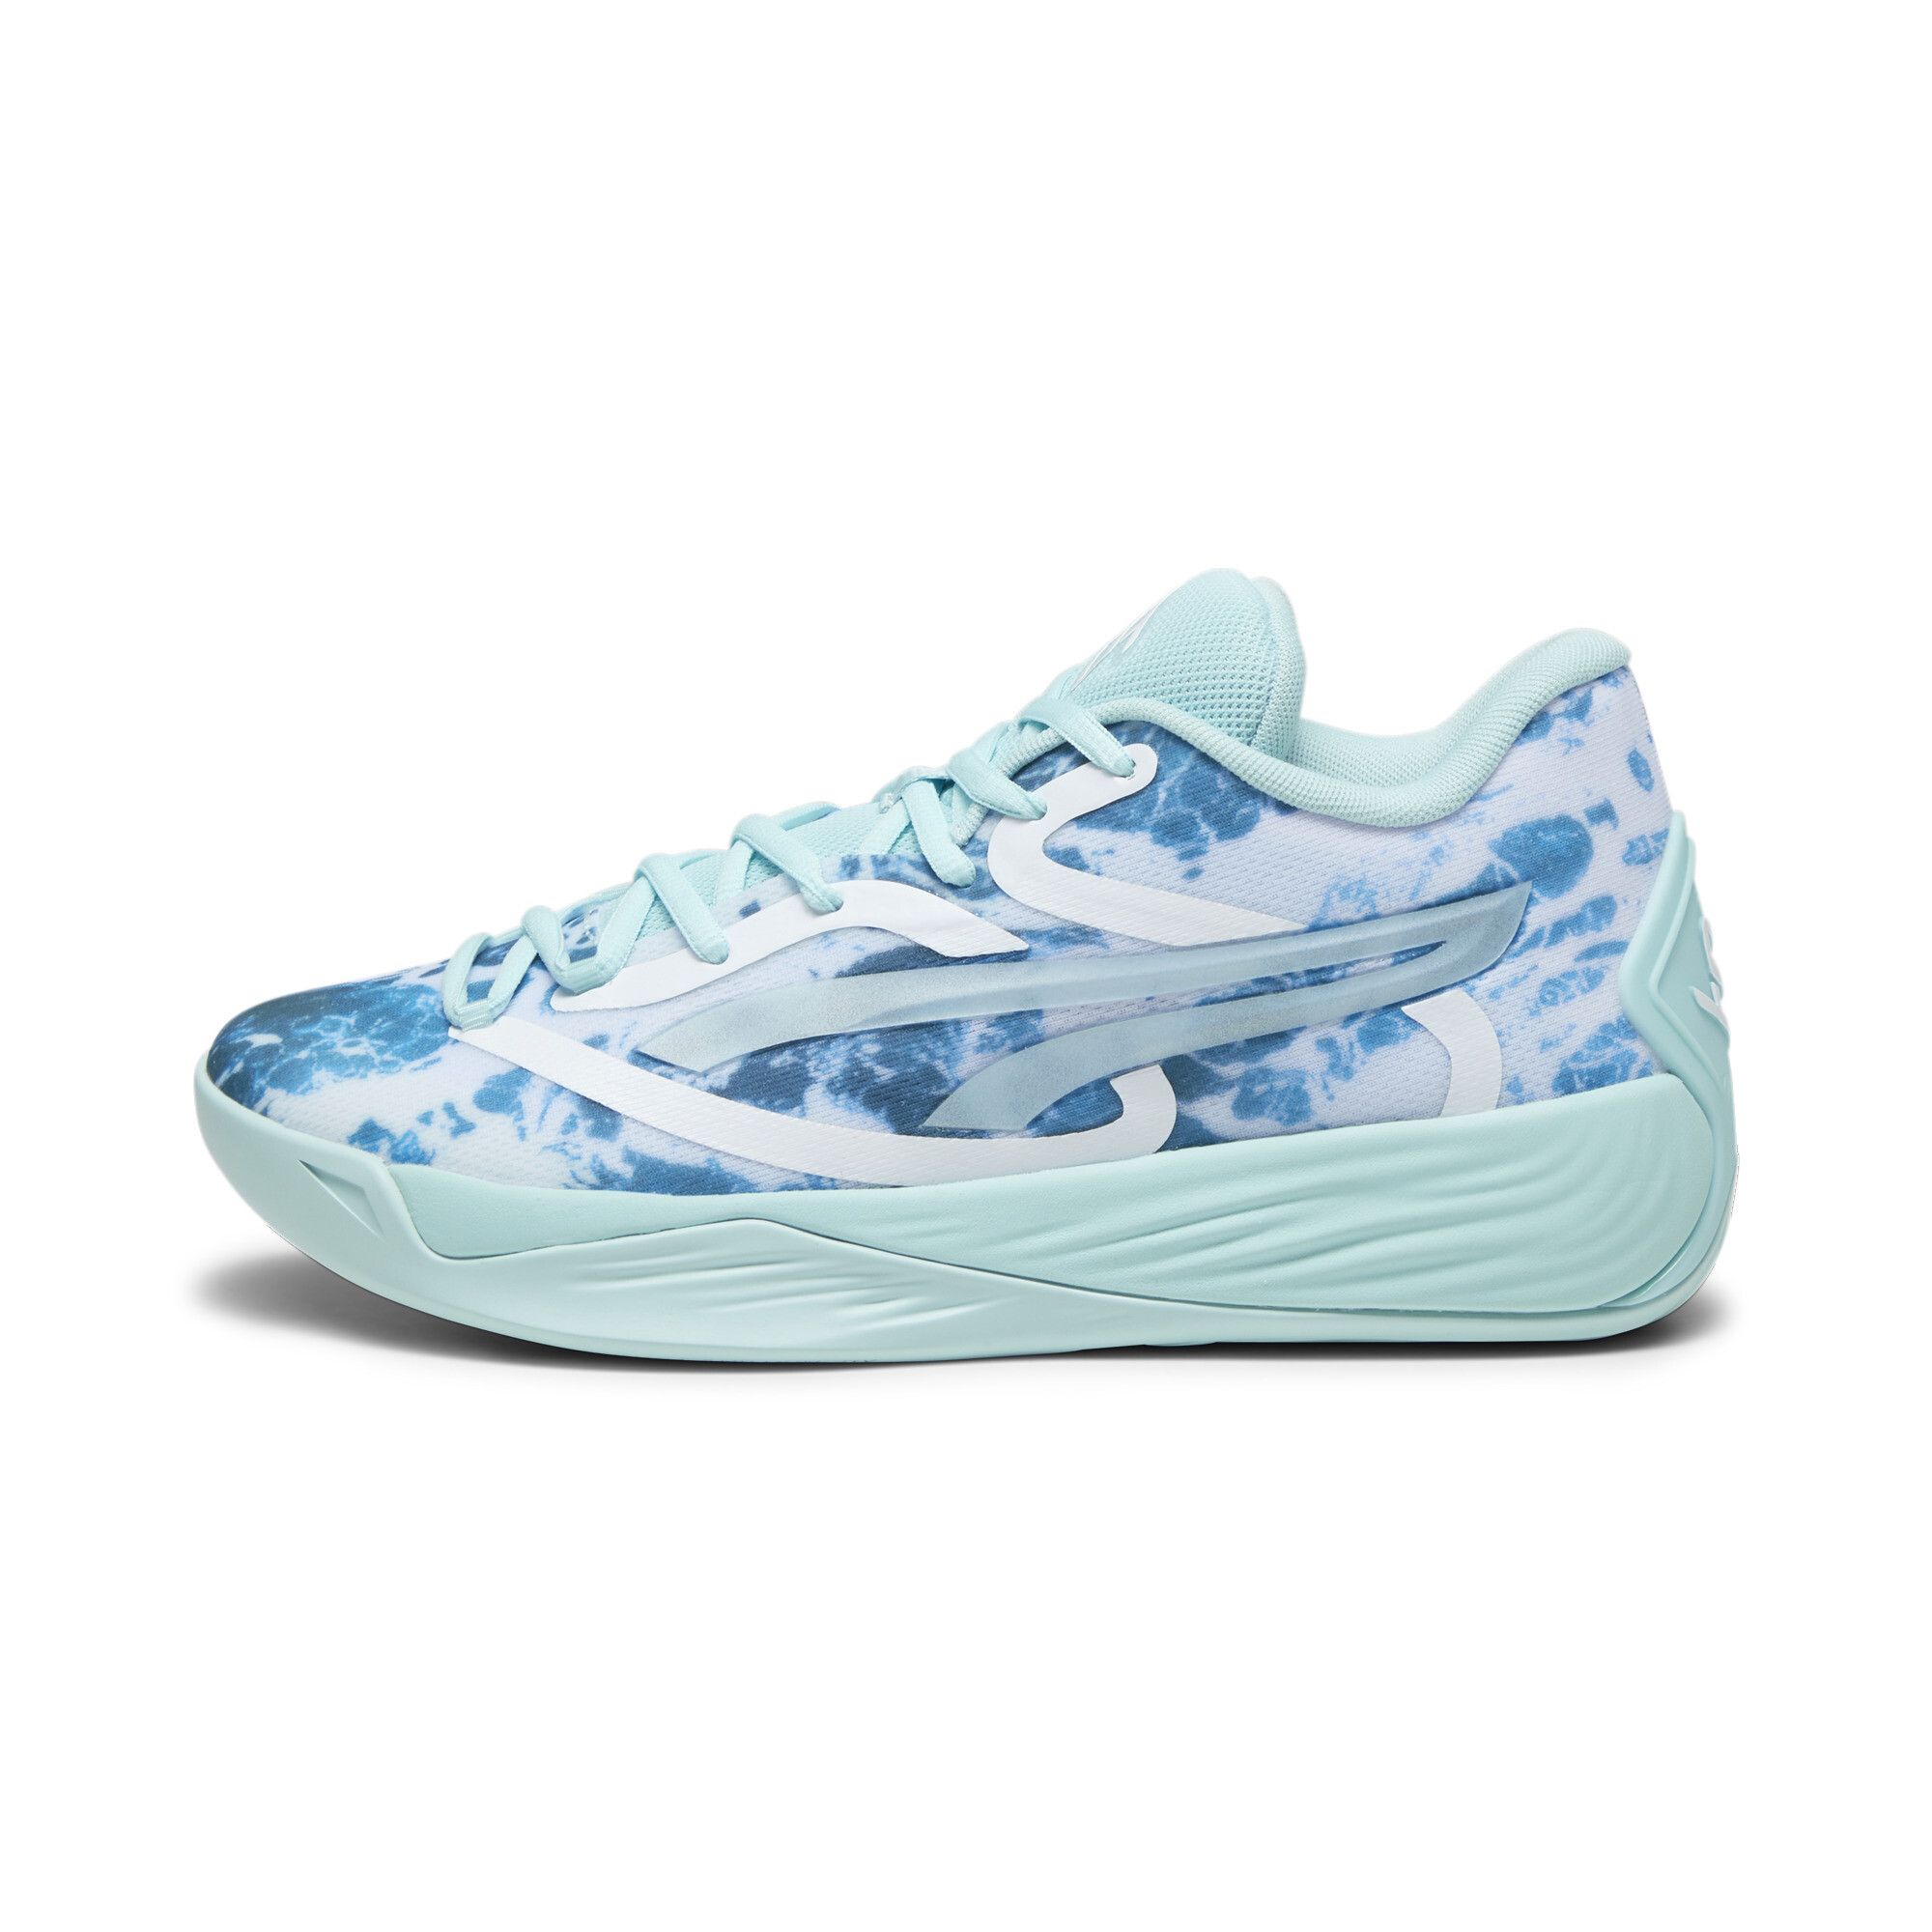 Women's Puma Stewie 2 Water's Basketball Shoes, Blue, Size 41, Shoes